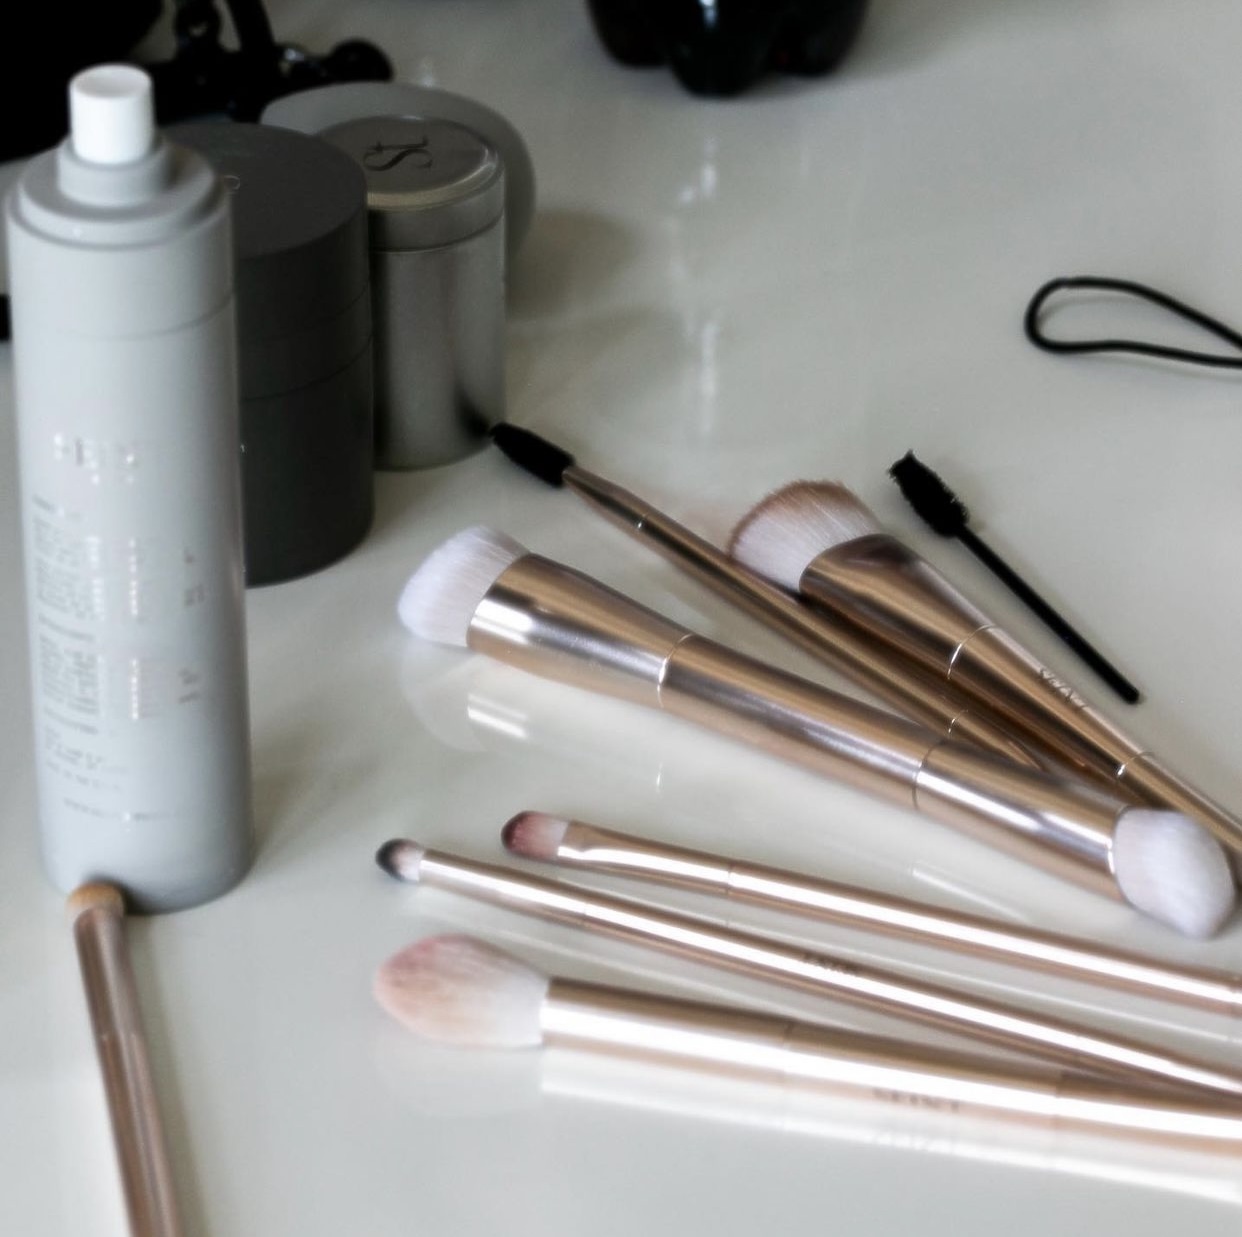 The Downsides of Using the Tiny Makeup Applicator Brushes